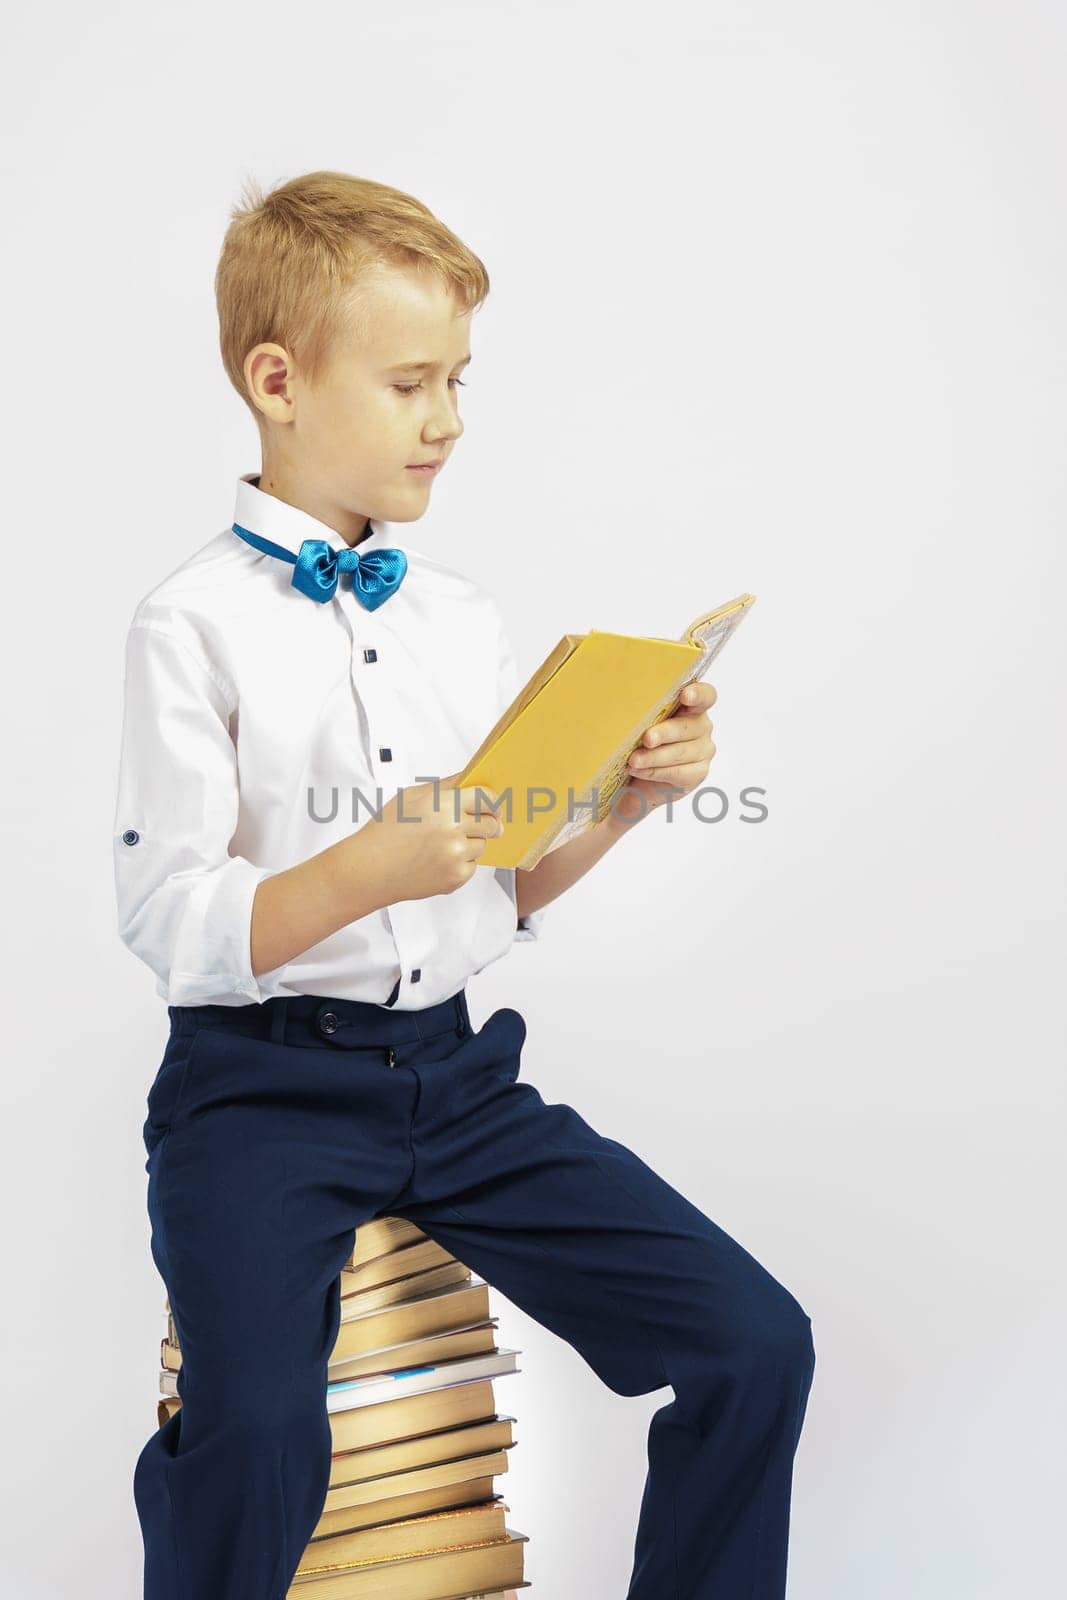 The schoolboy is sitting on books and reading a book. Isolated background. Education concept